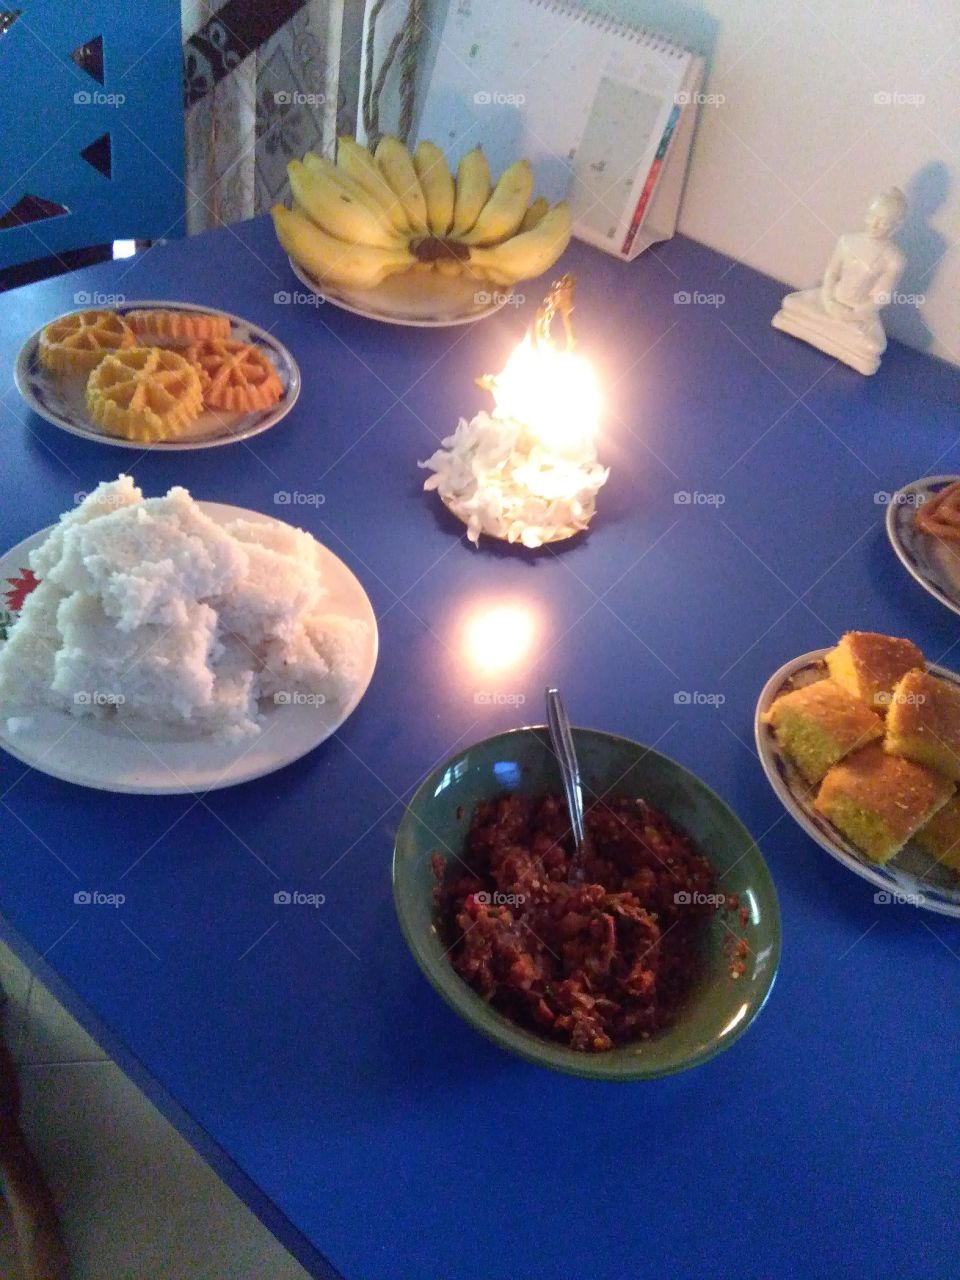 New year food table